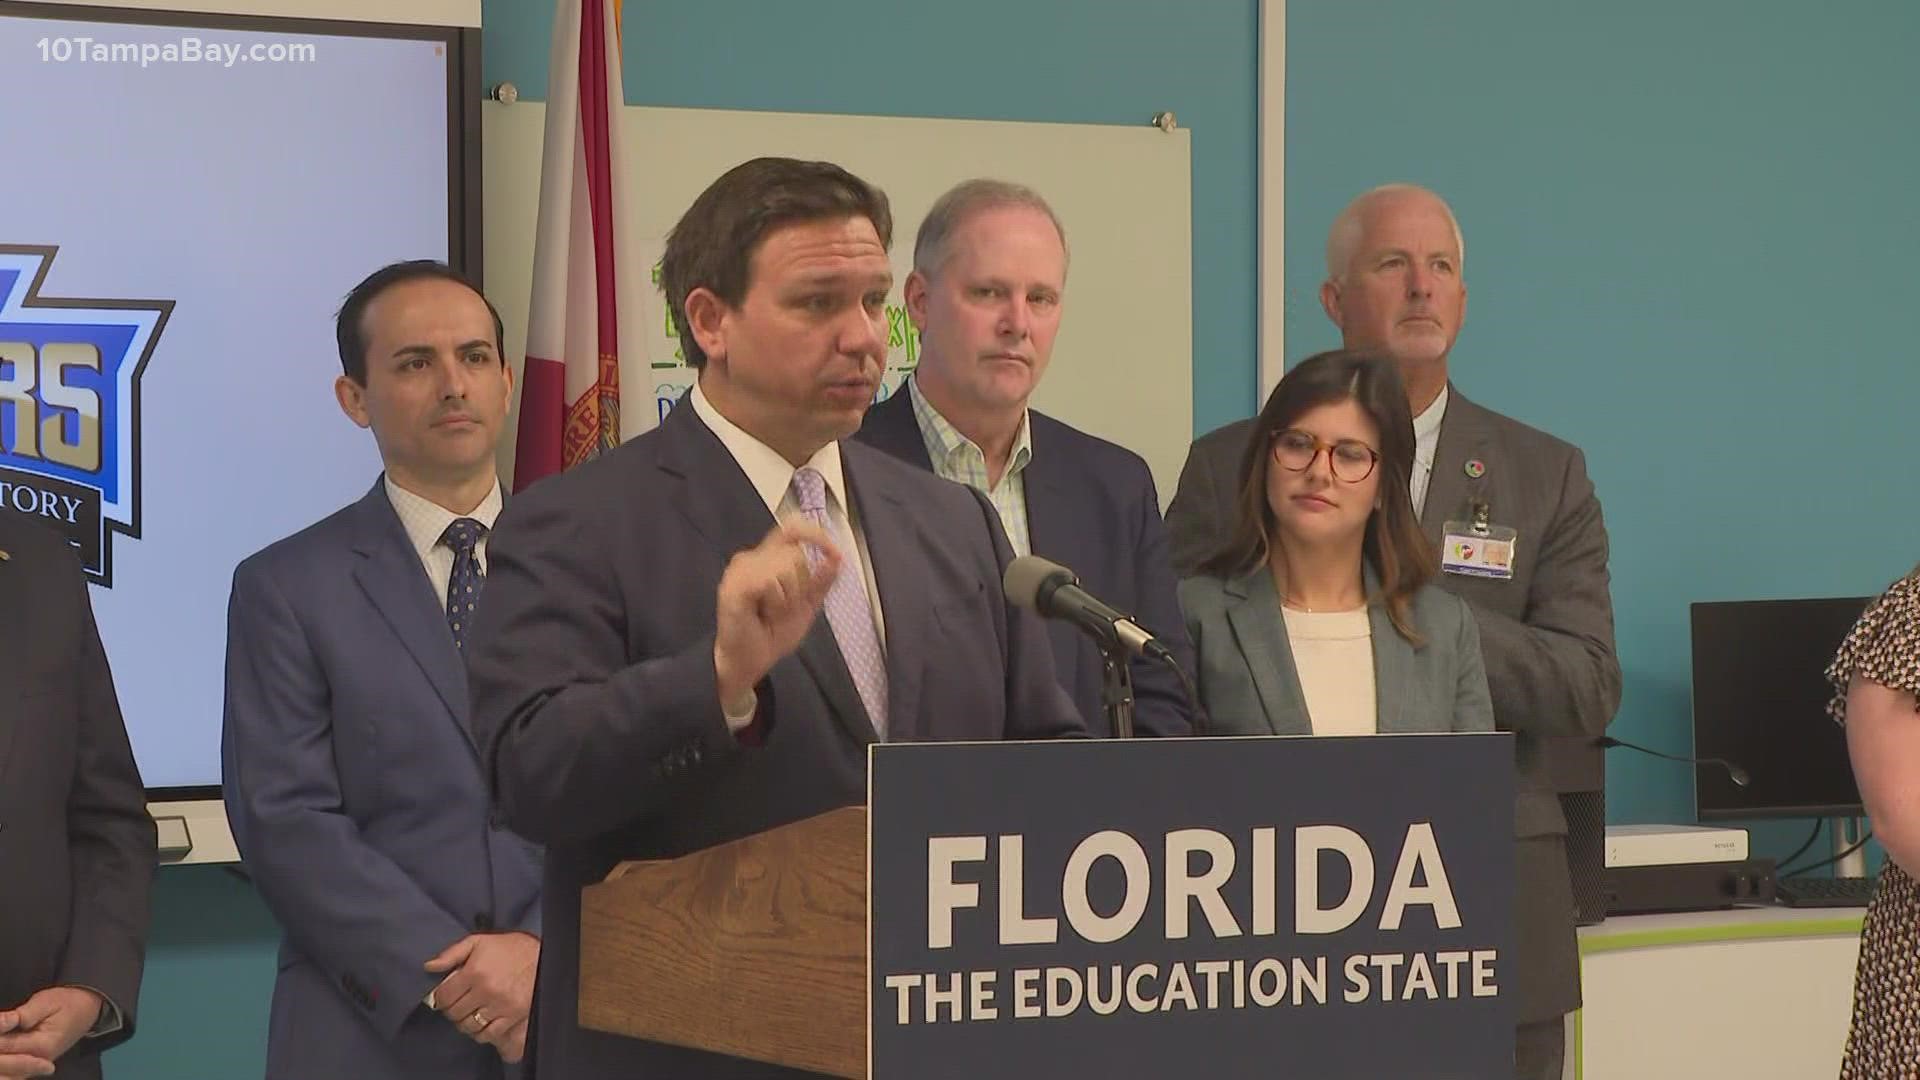 DeSantis was asked of his response to some Disney workers who planned to protest a bill that would bar classroom instruction of sexual orientation to young students.